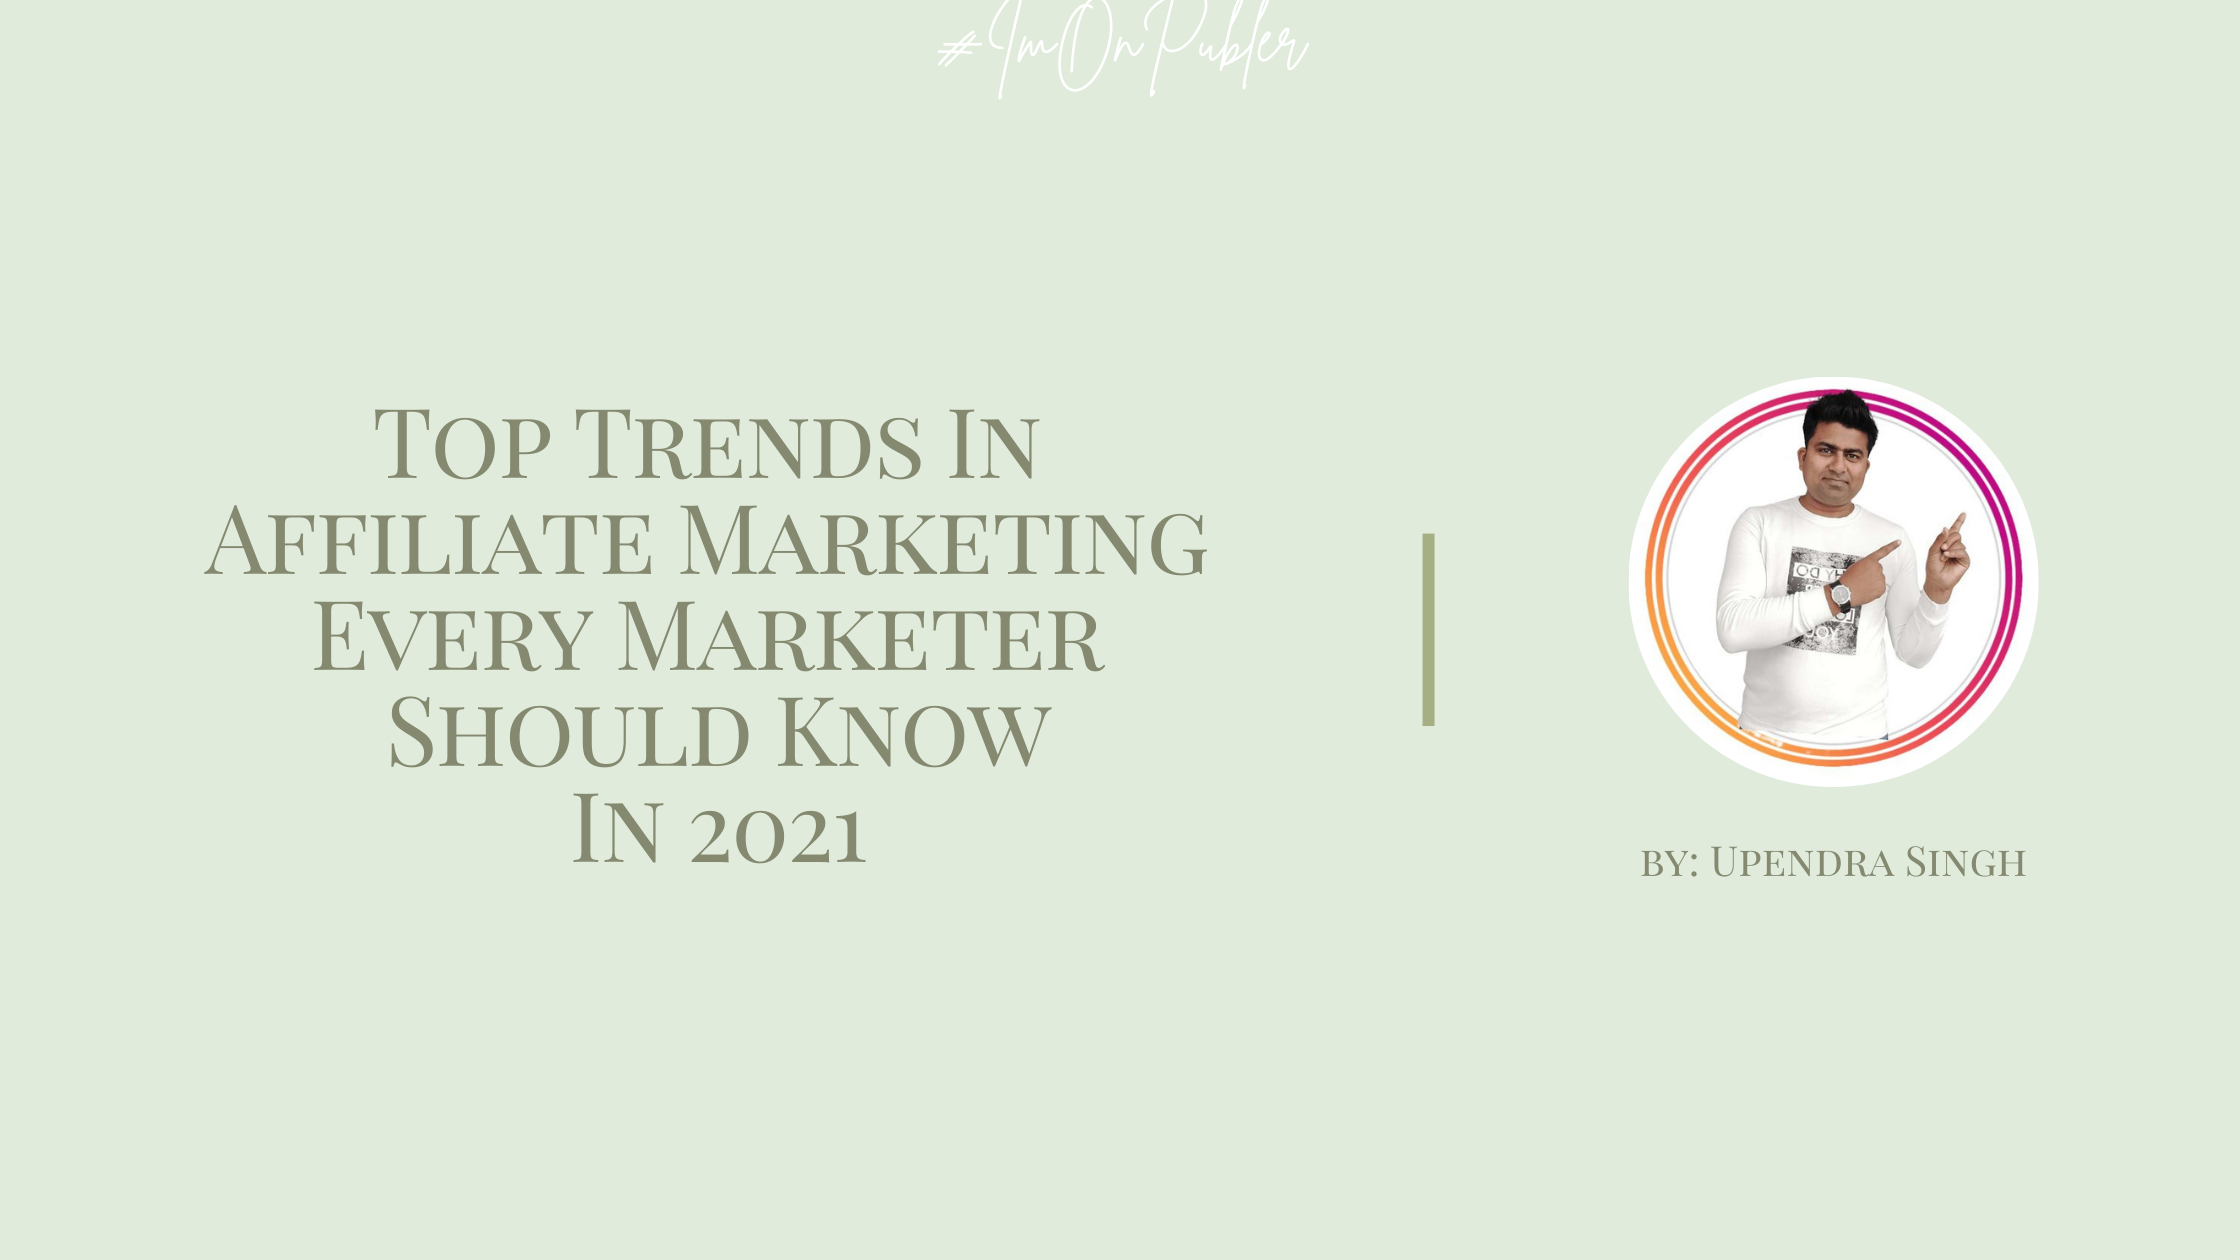 Top Trends In Affiliate Marketing Every Marketer Should Know In 2021 by Upendra Singh